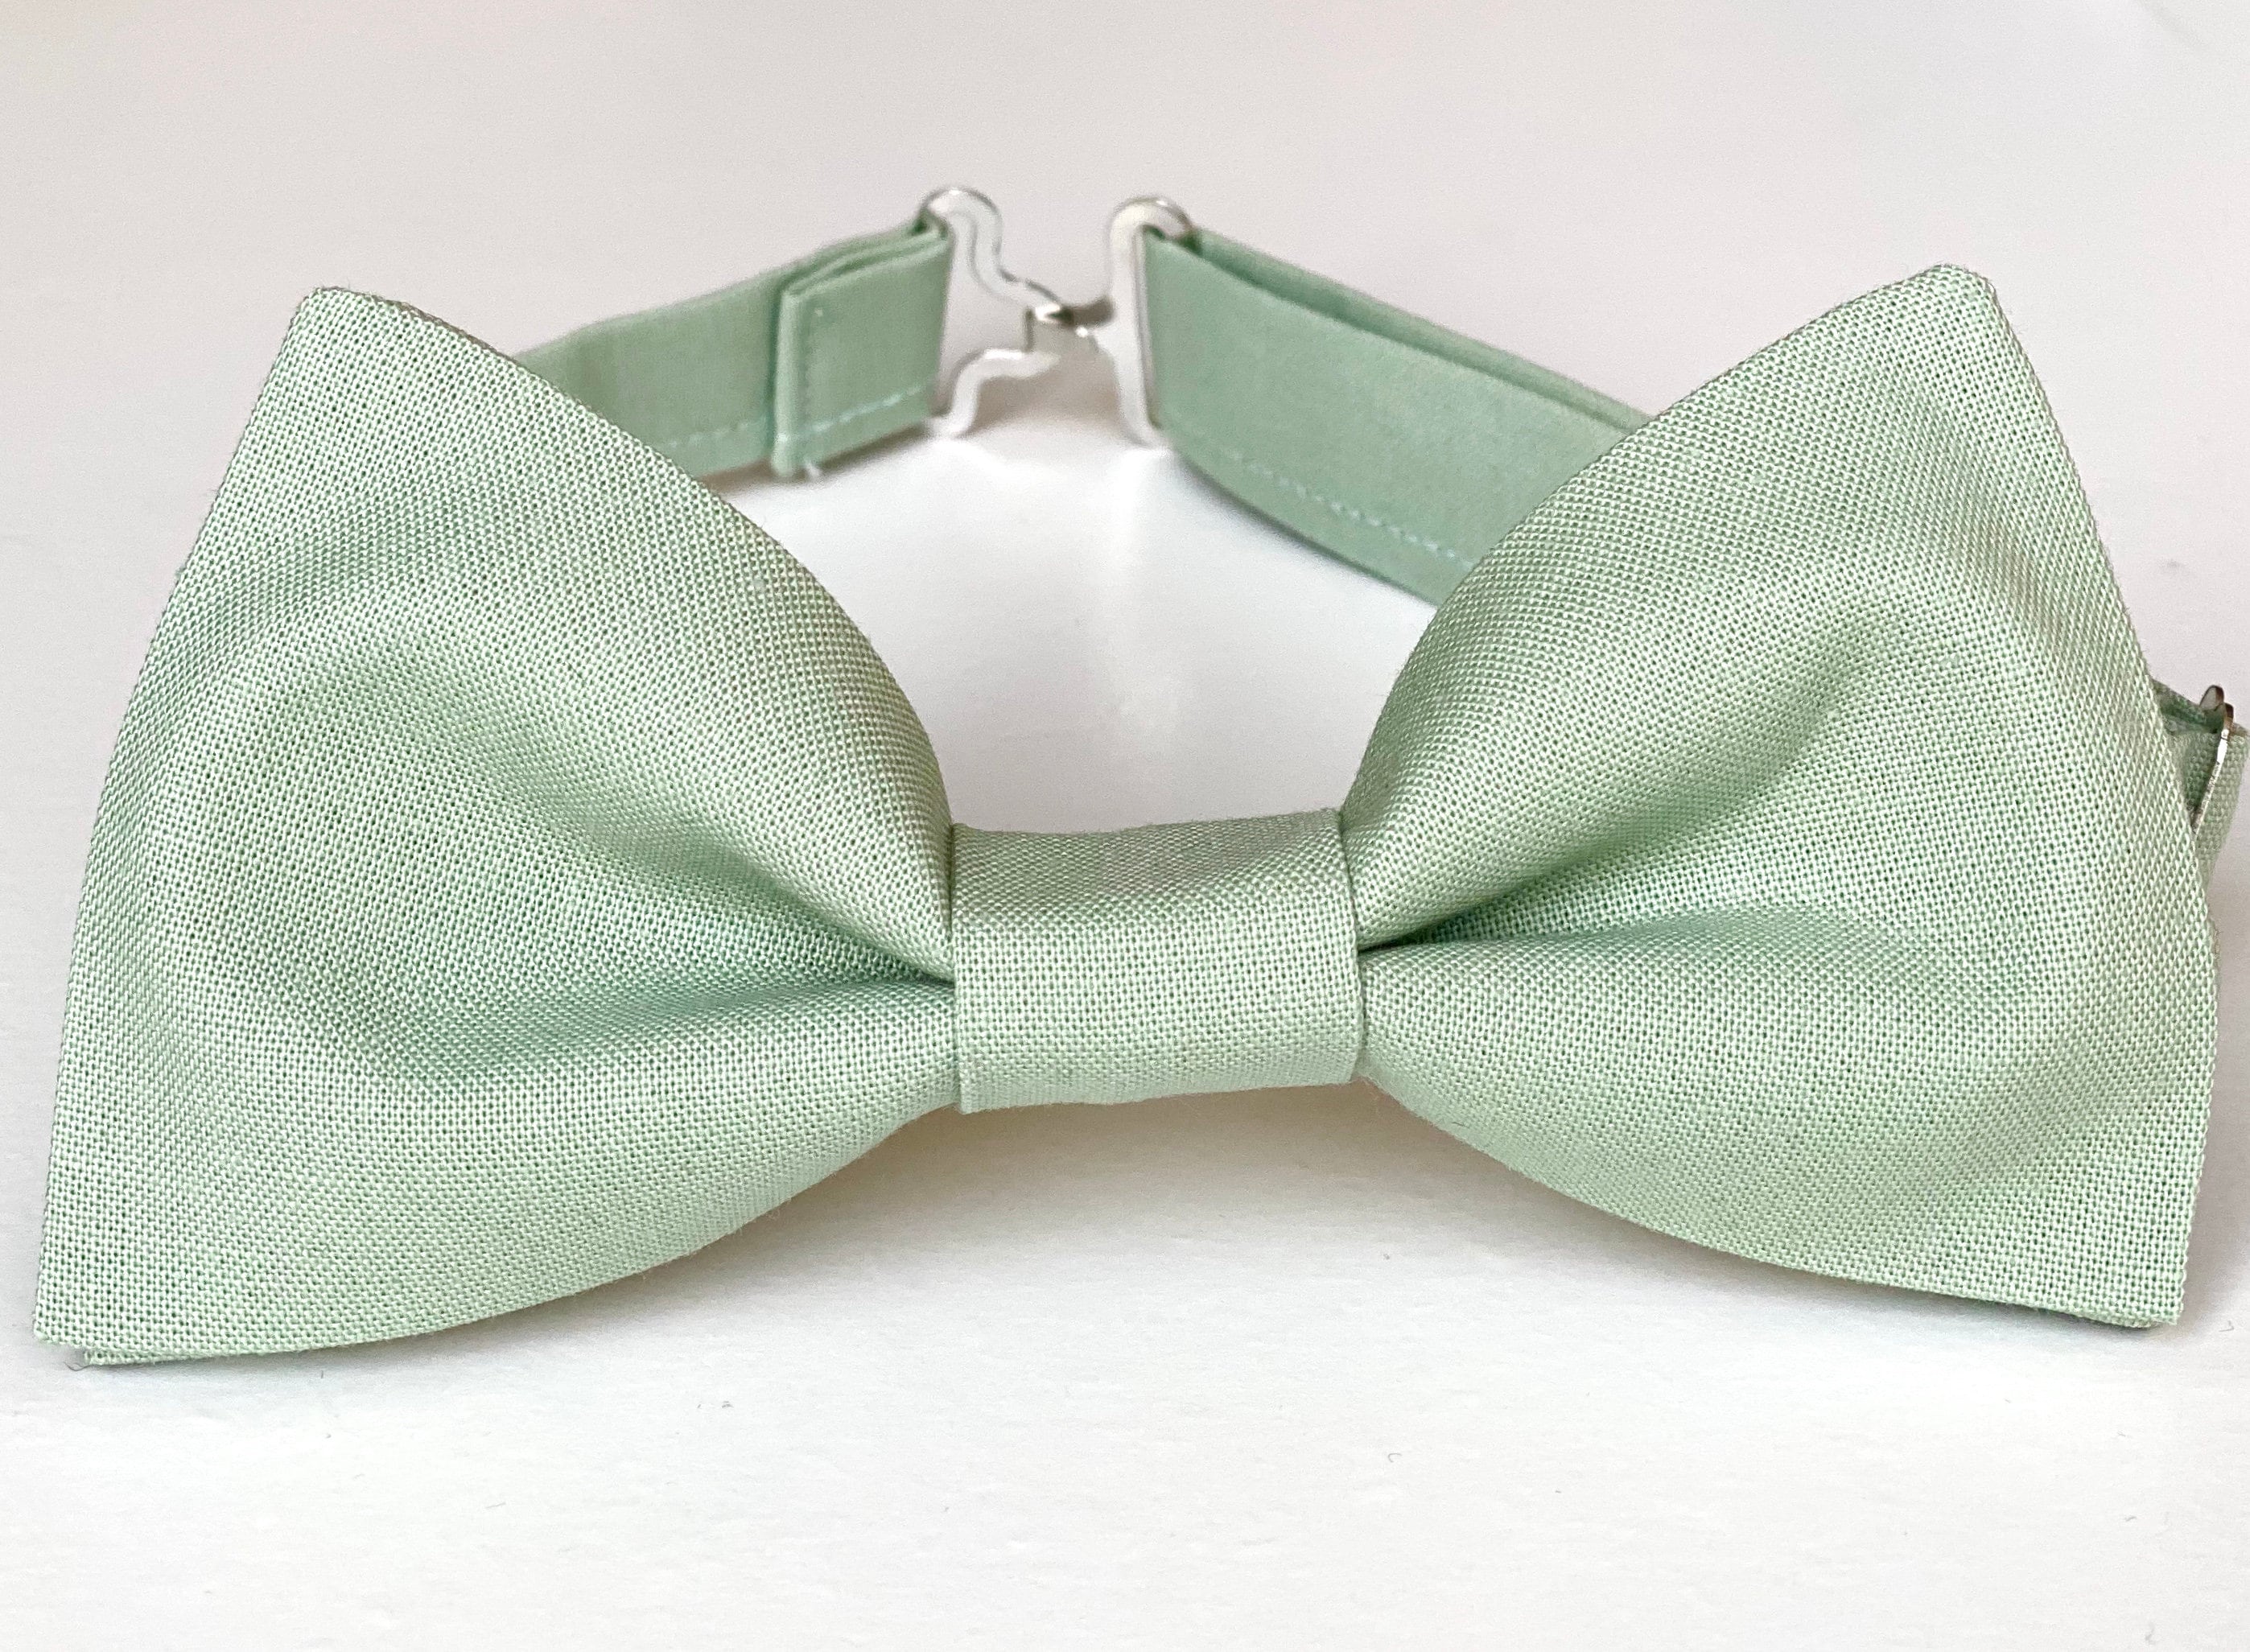 Seafoam bow tie pale green bow tie for men green bow ties | Etsy